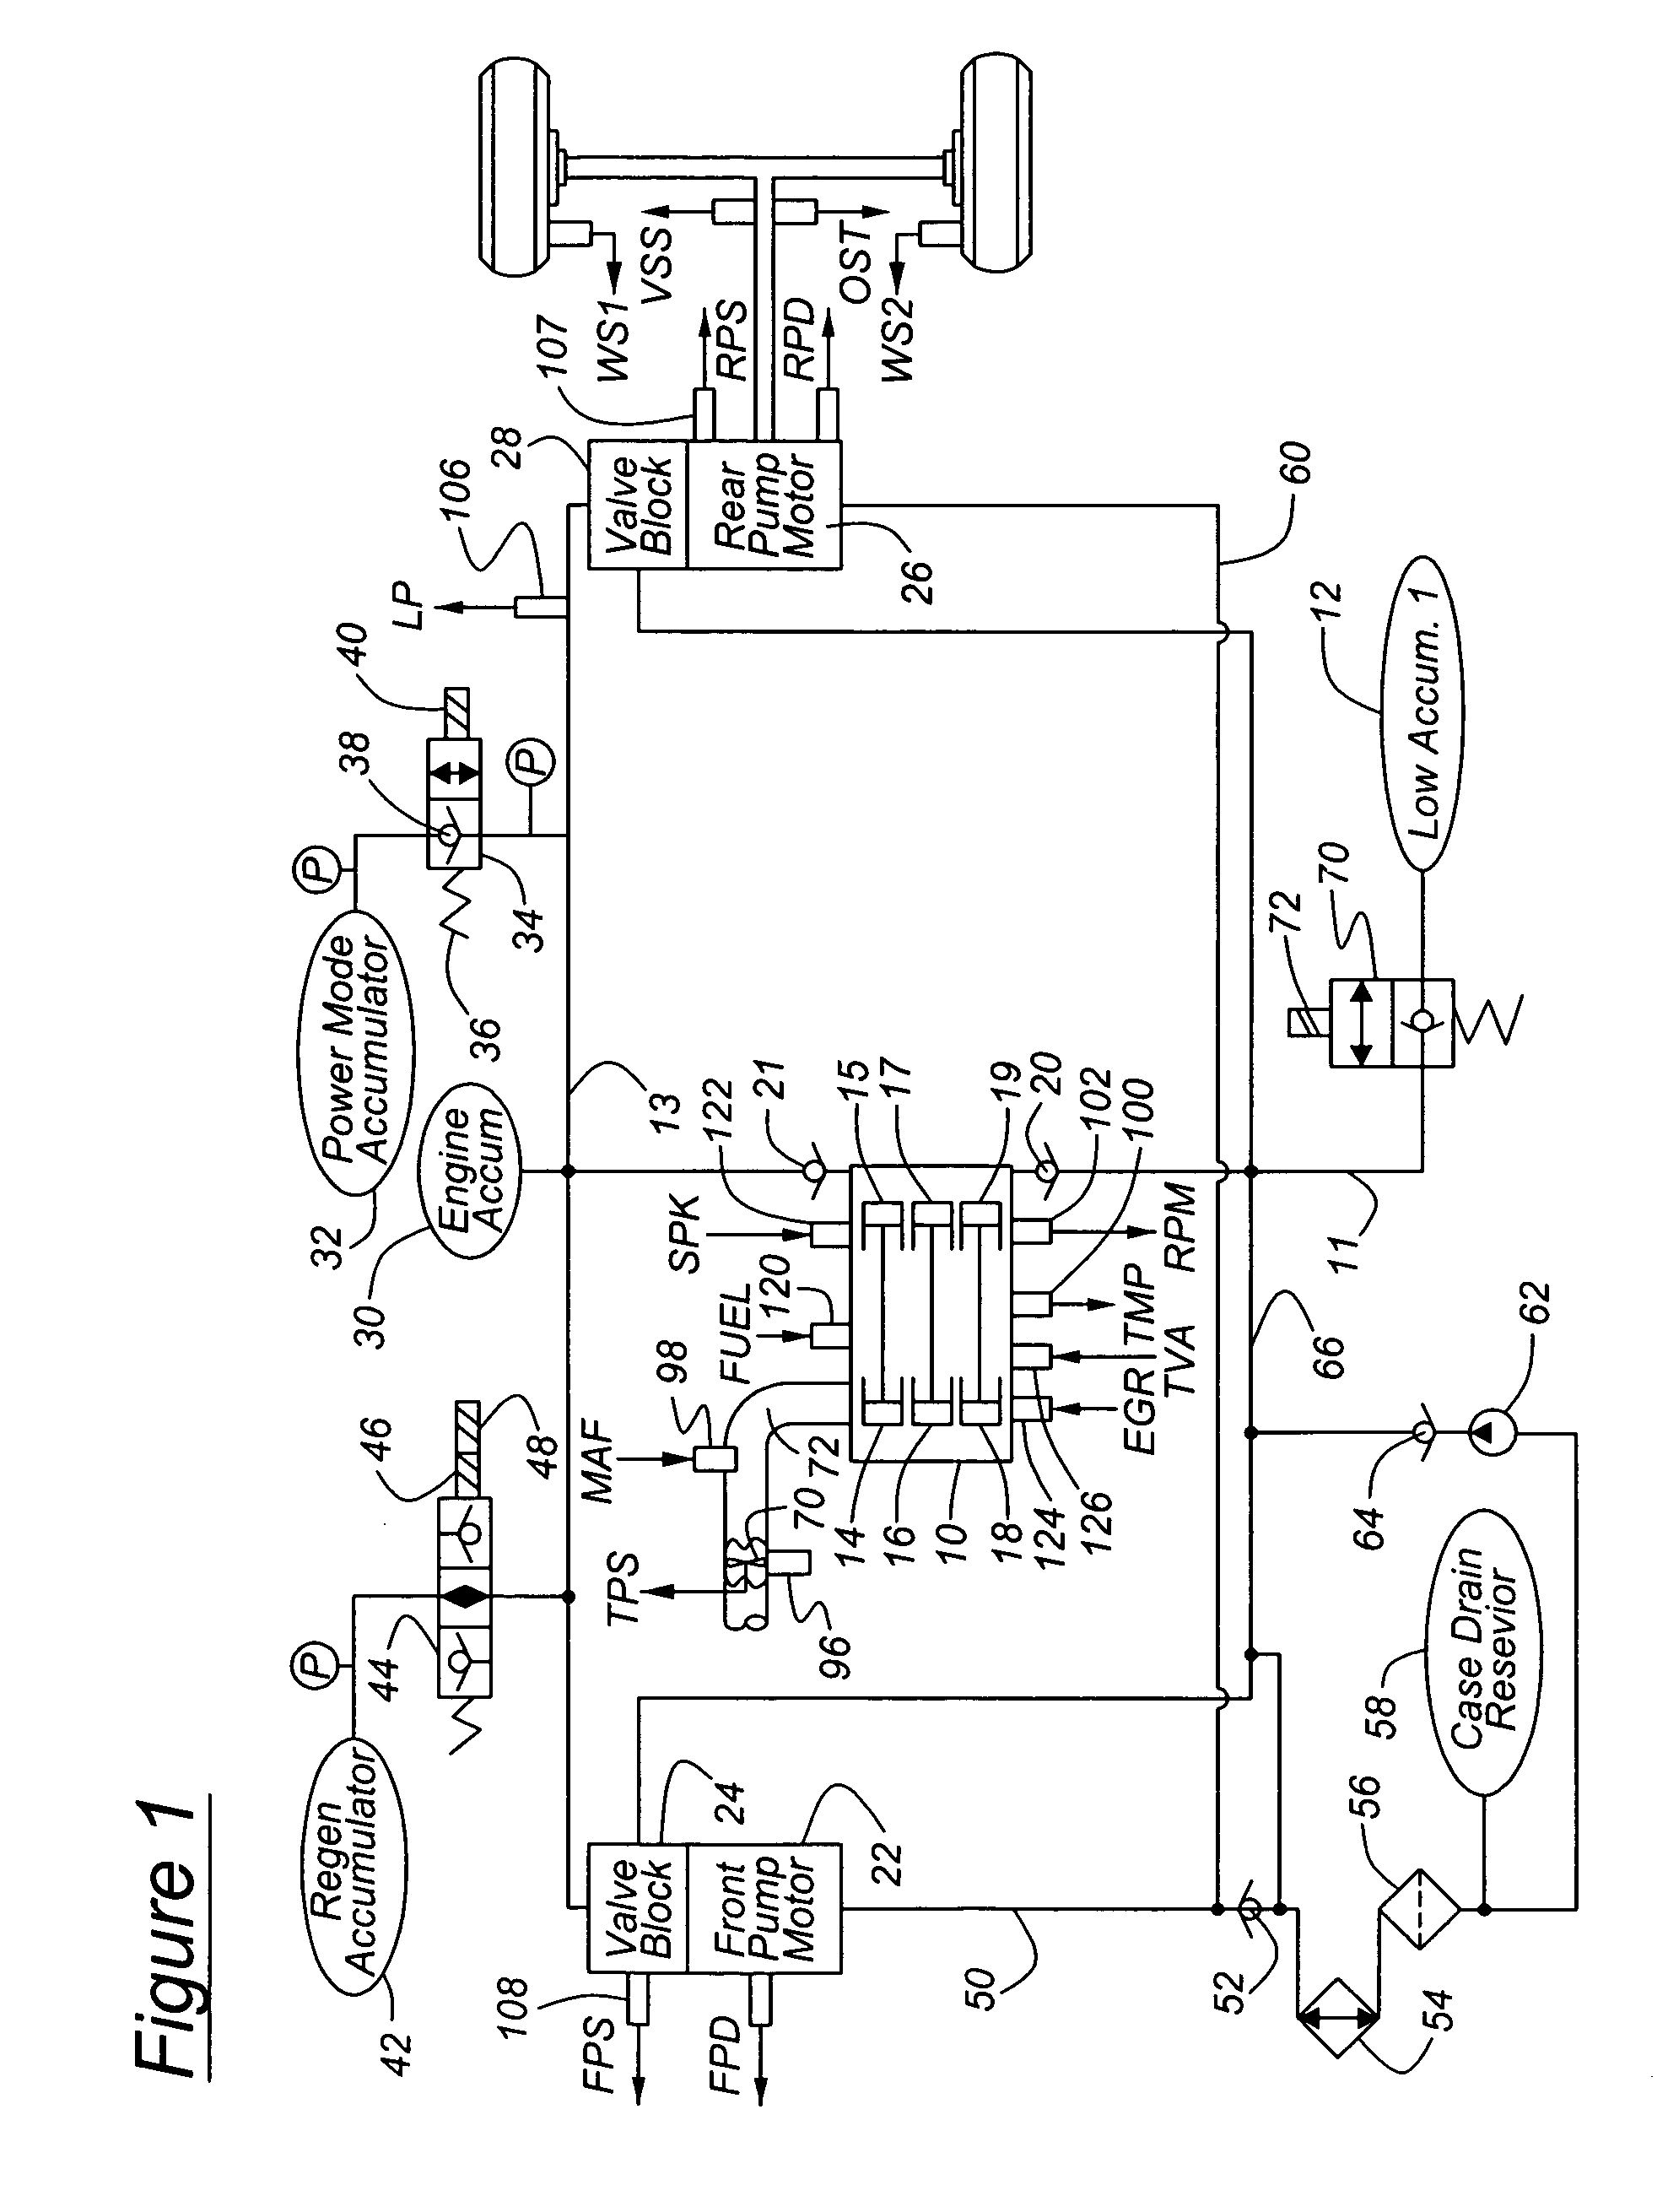 Engine control based on flow rate and pressure for hydraulic hybrid vehicle